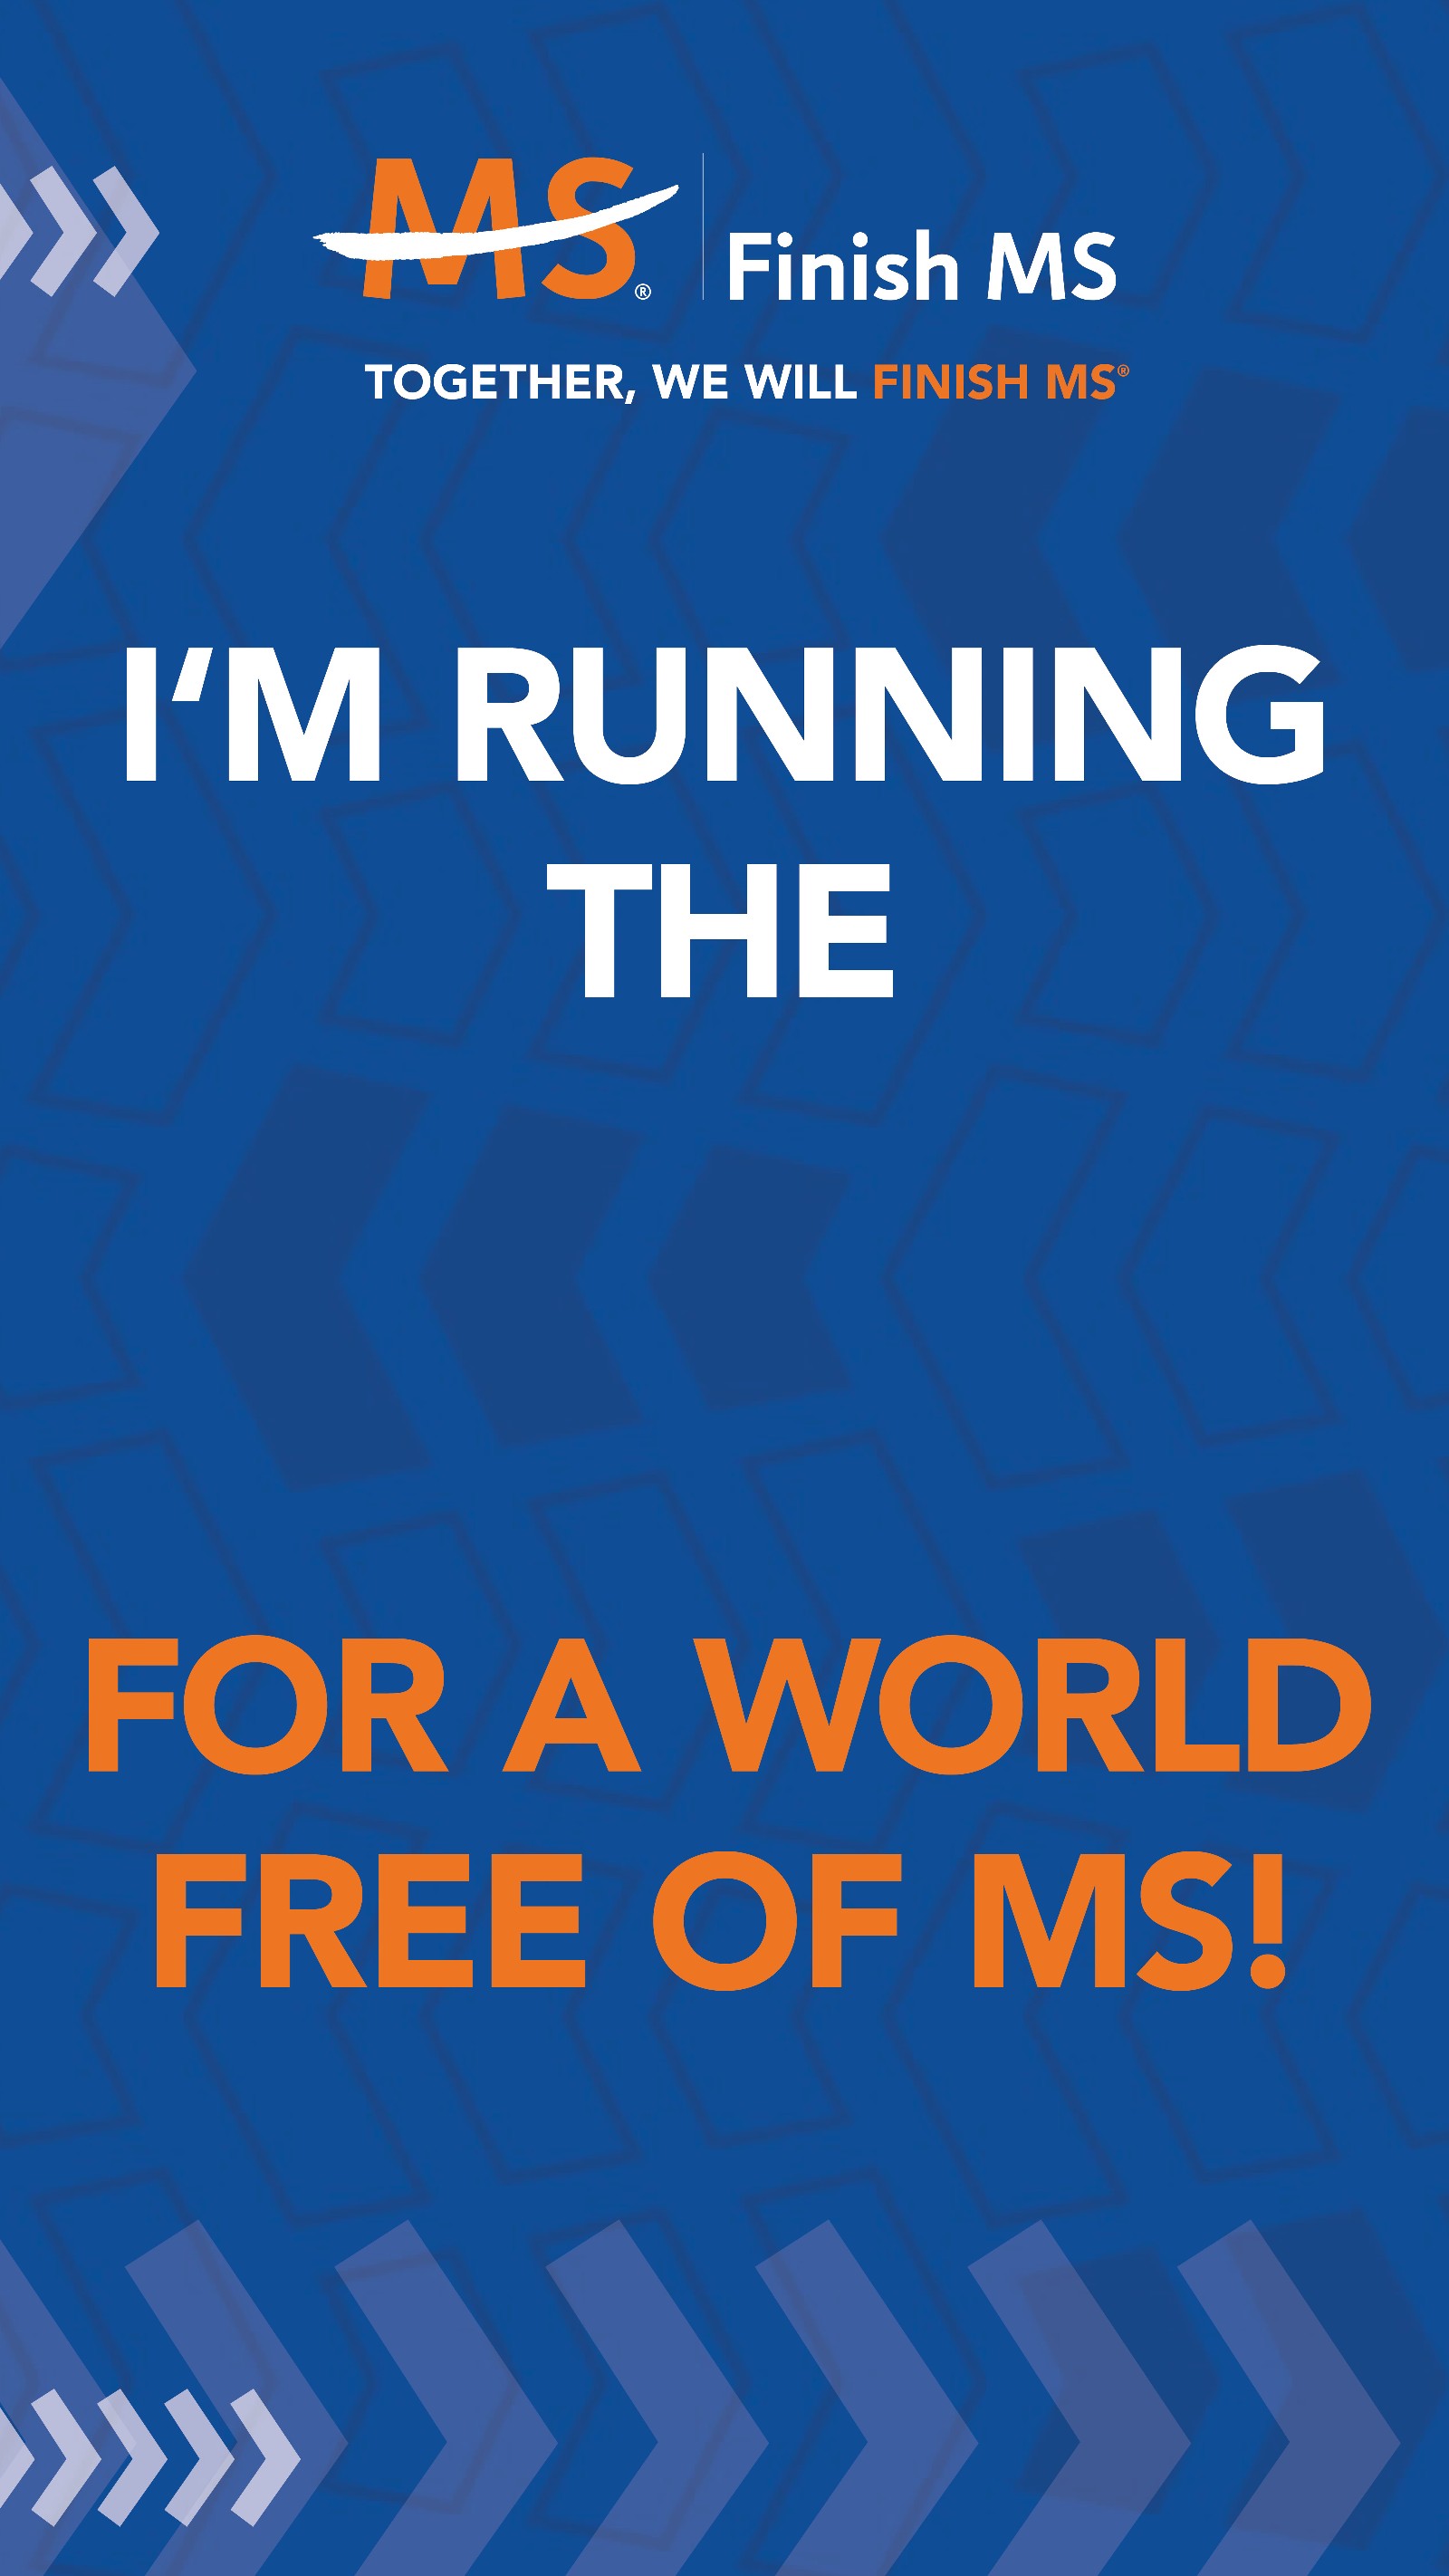 Finish MS - i'm running the ___ for a world of MS v3